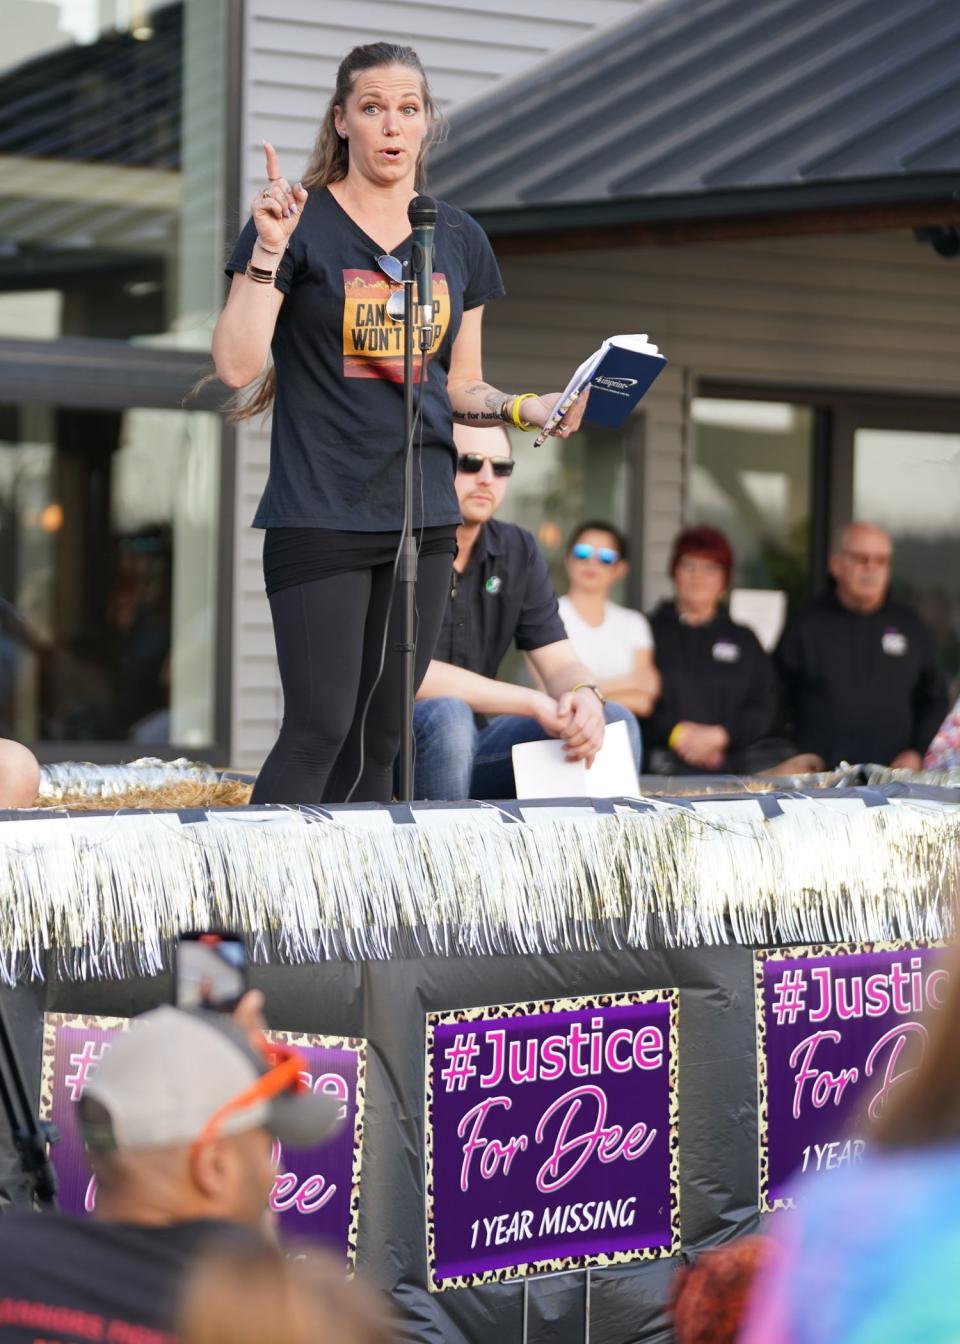 Lindsey Turner, founder of Can’t Stop Won’t Stop, speaks April 23, 2022, at the one-year anniversary vigil for the disappearance of Dee Ann Warner.